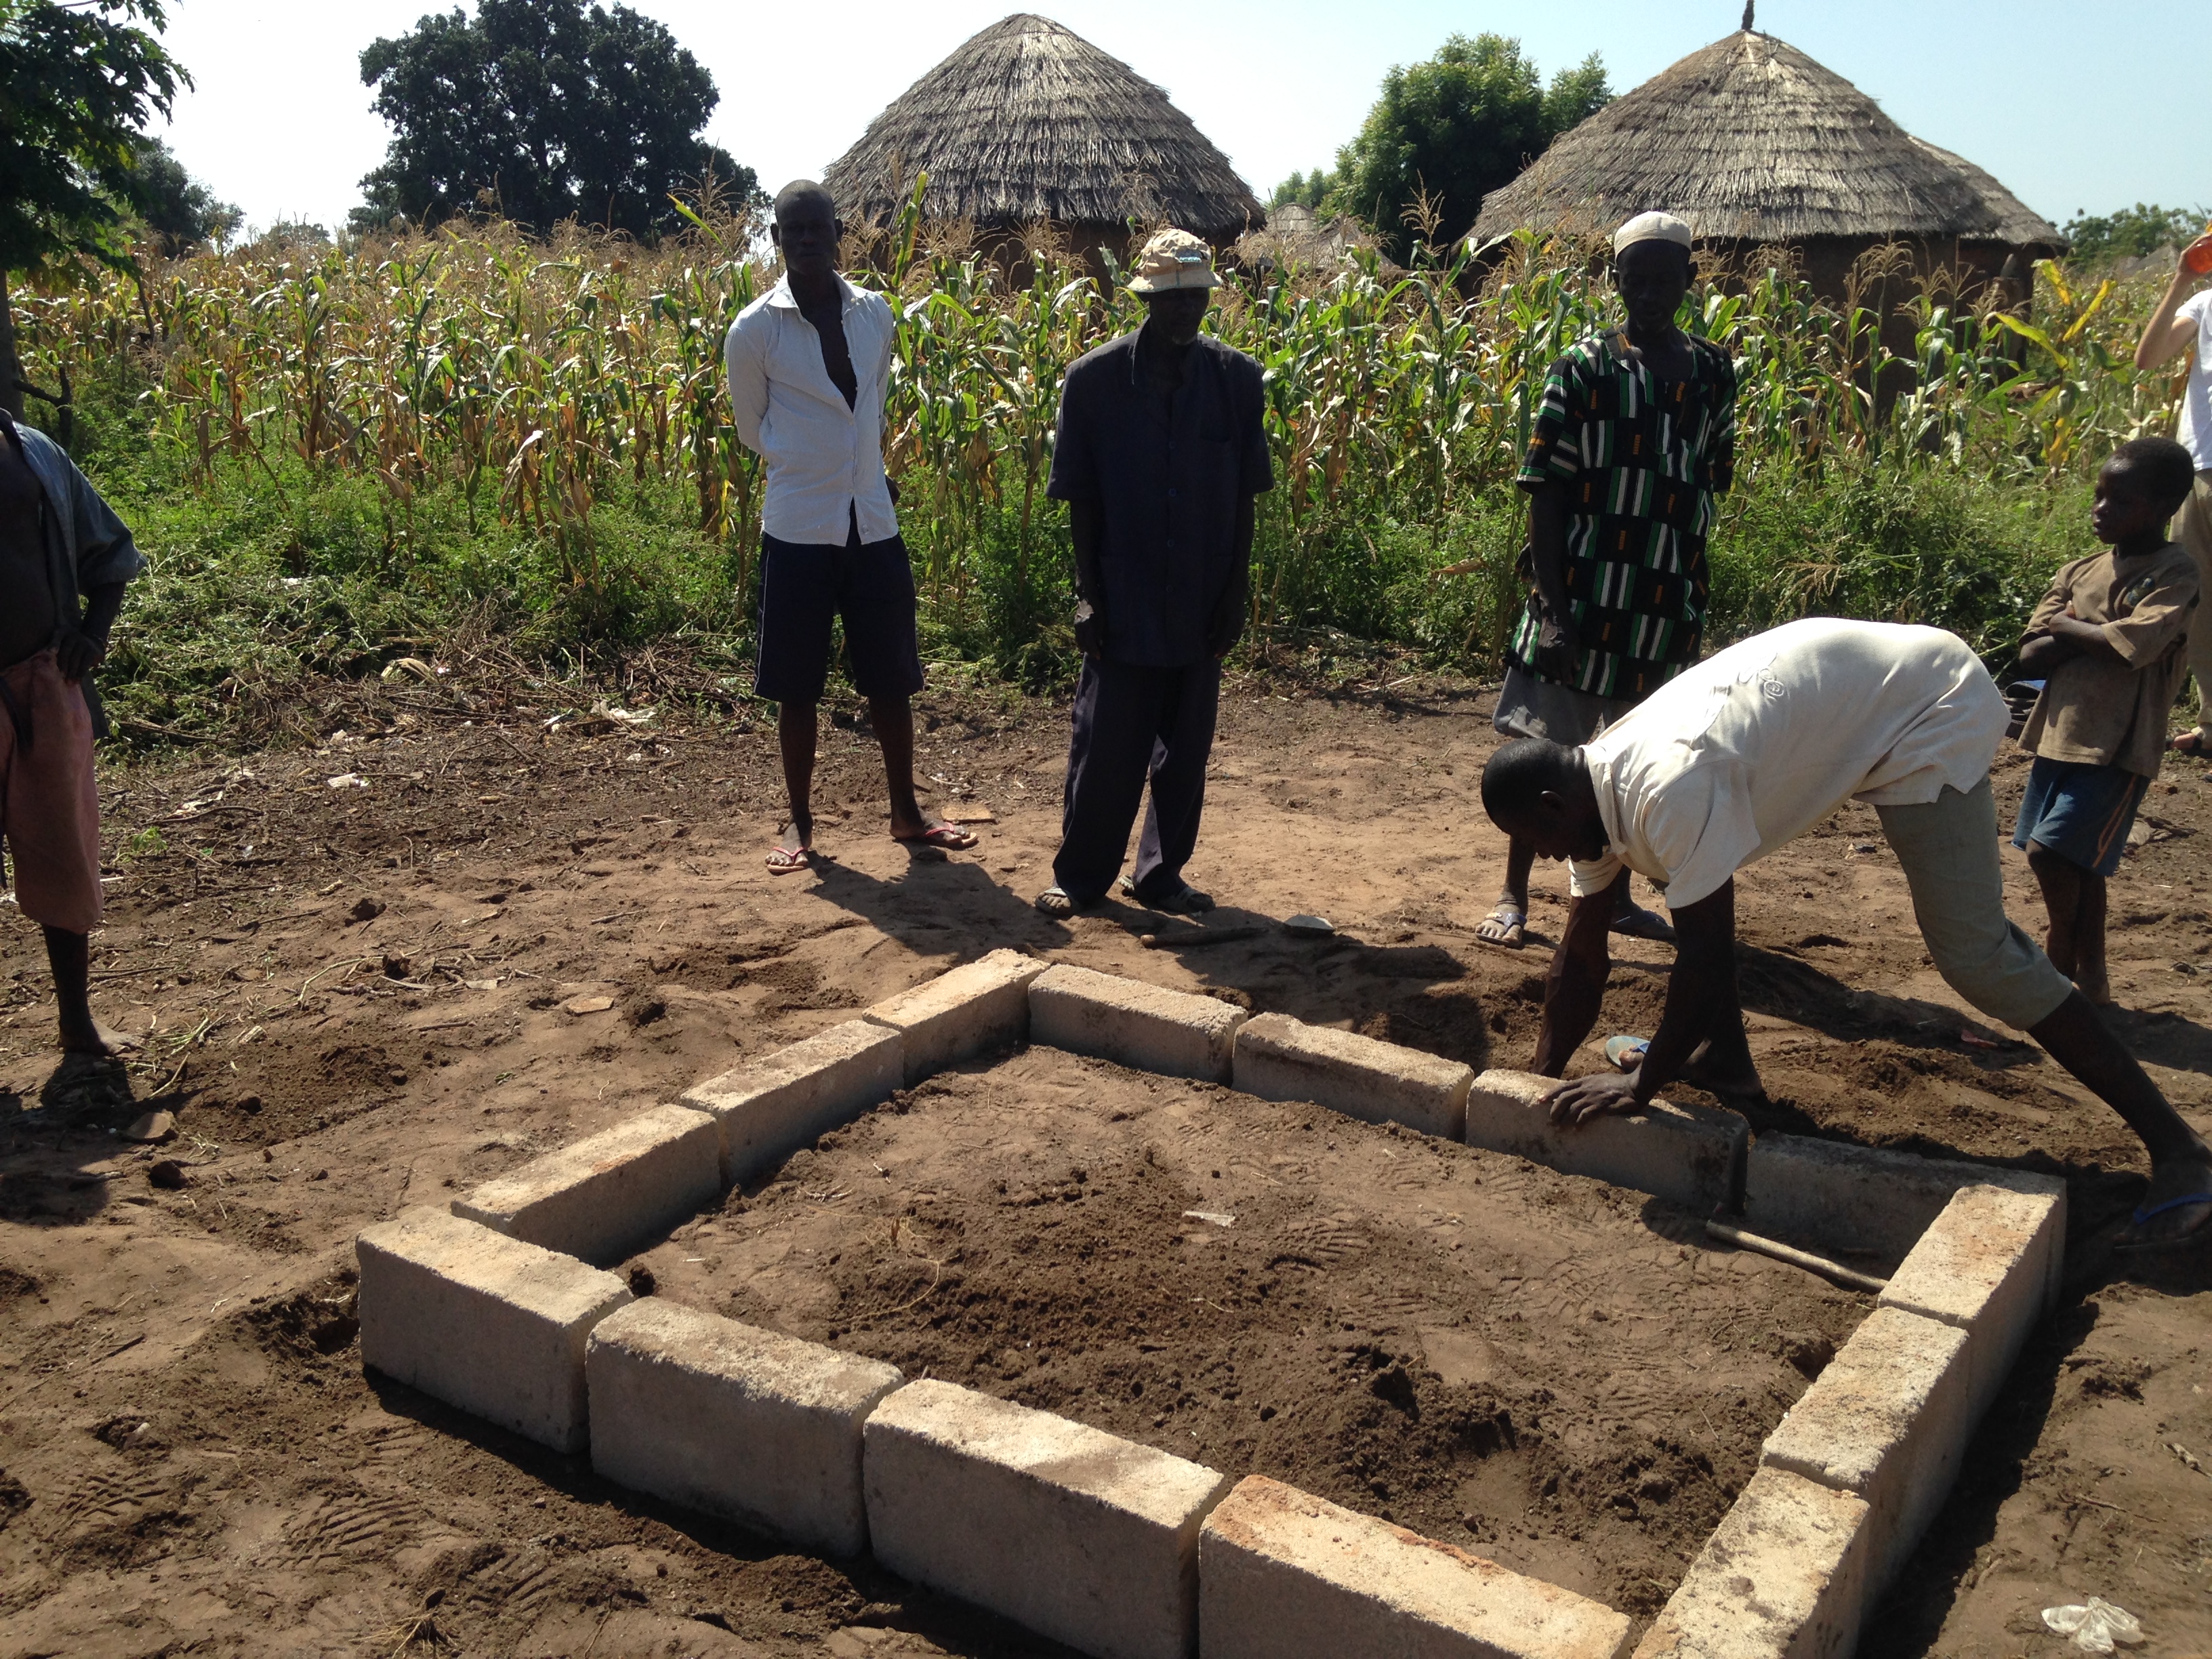 The village mason and his team constructing the foundation.